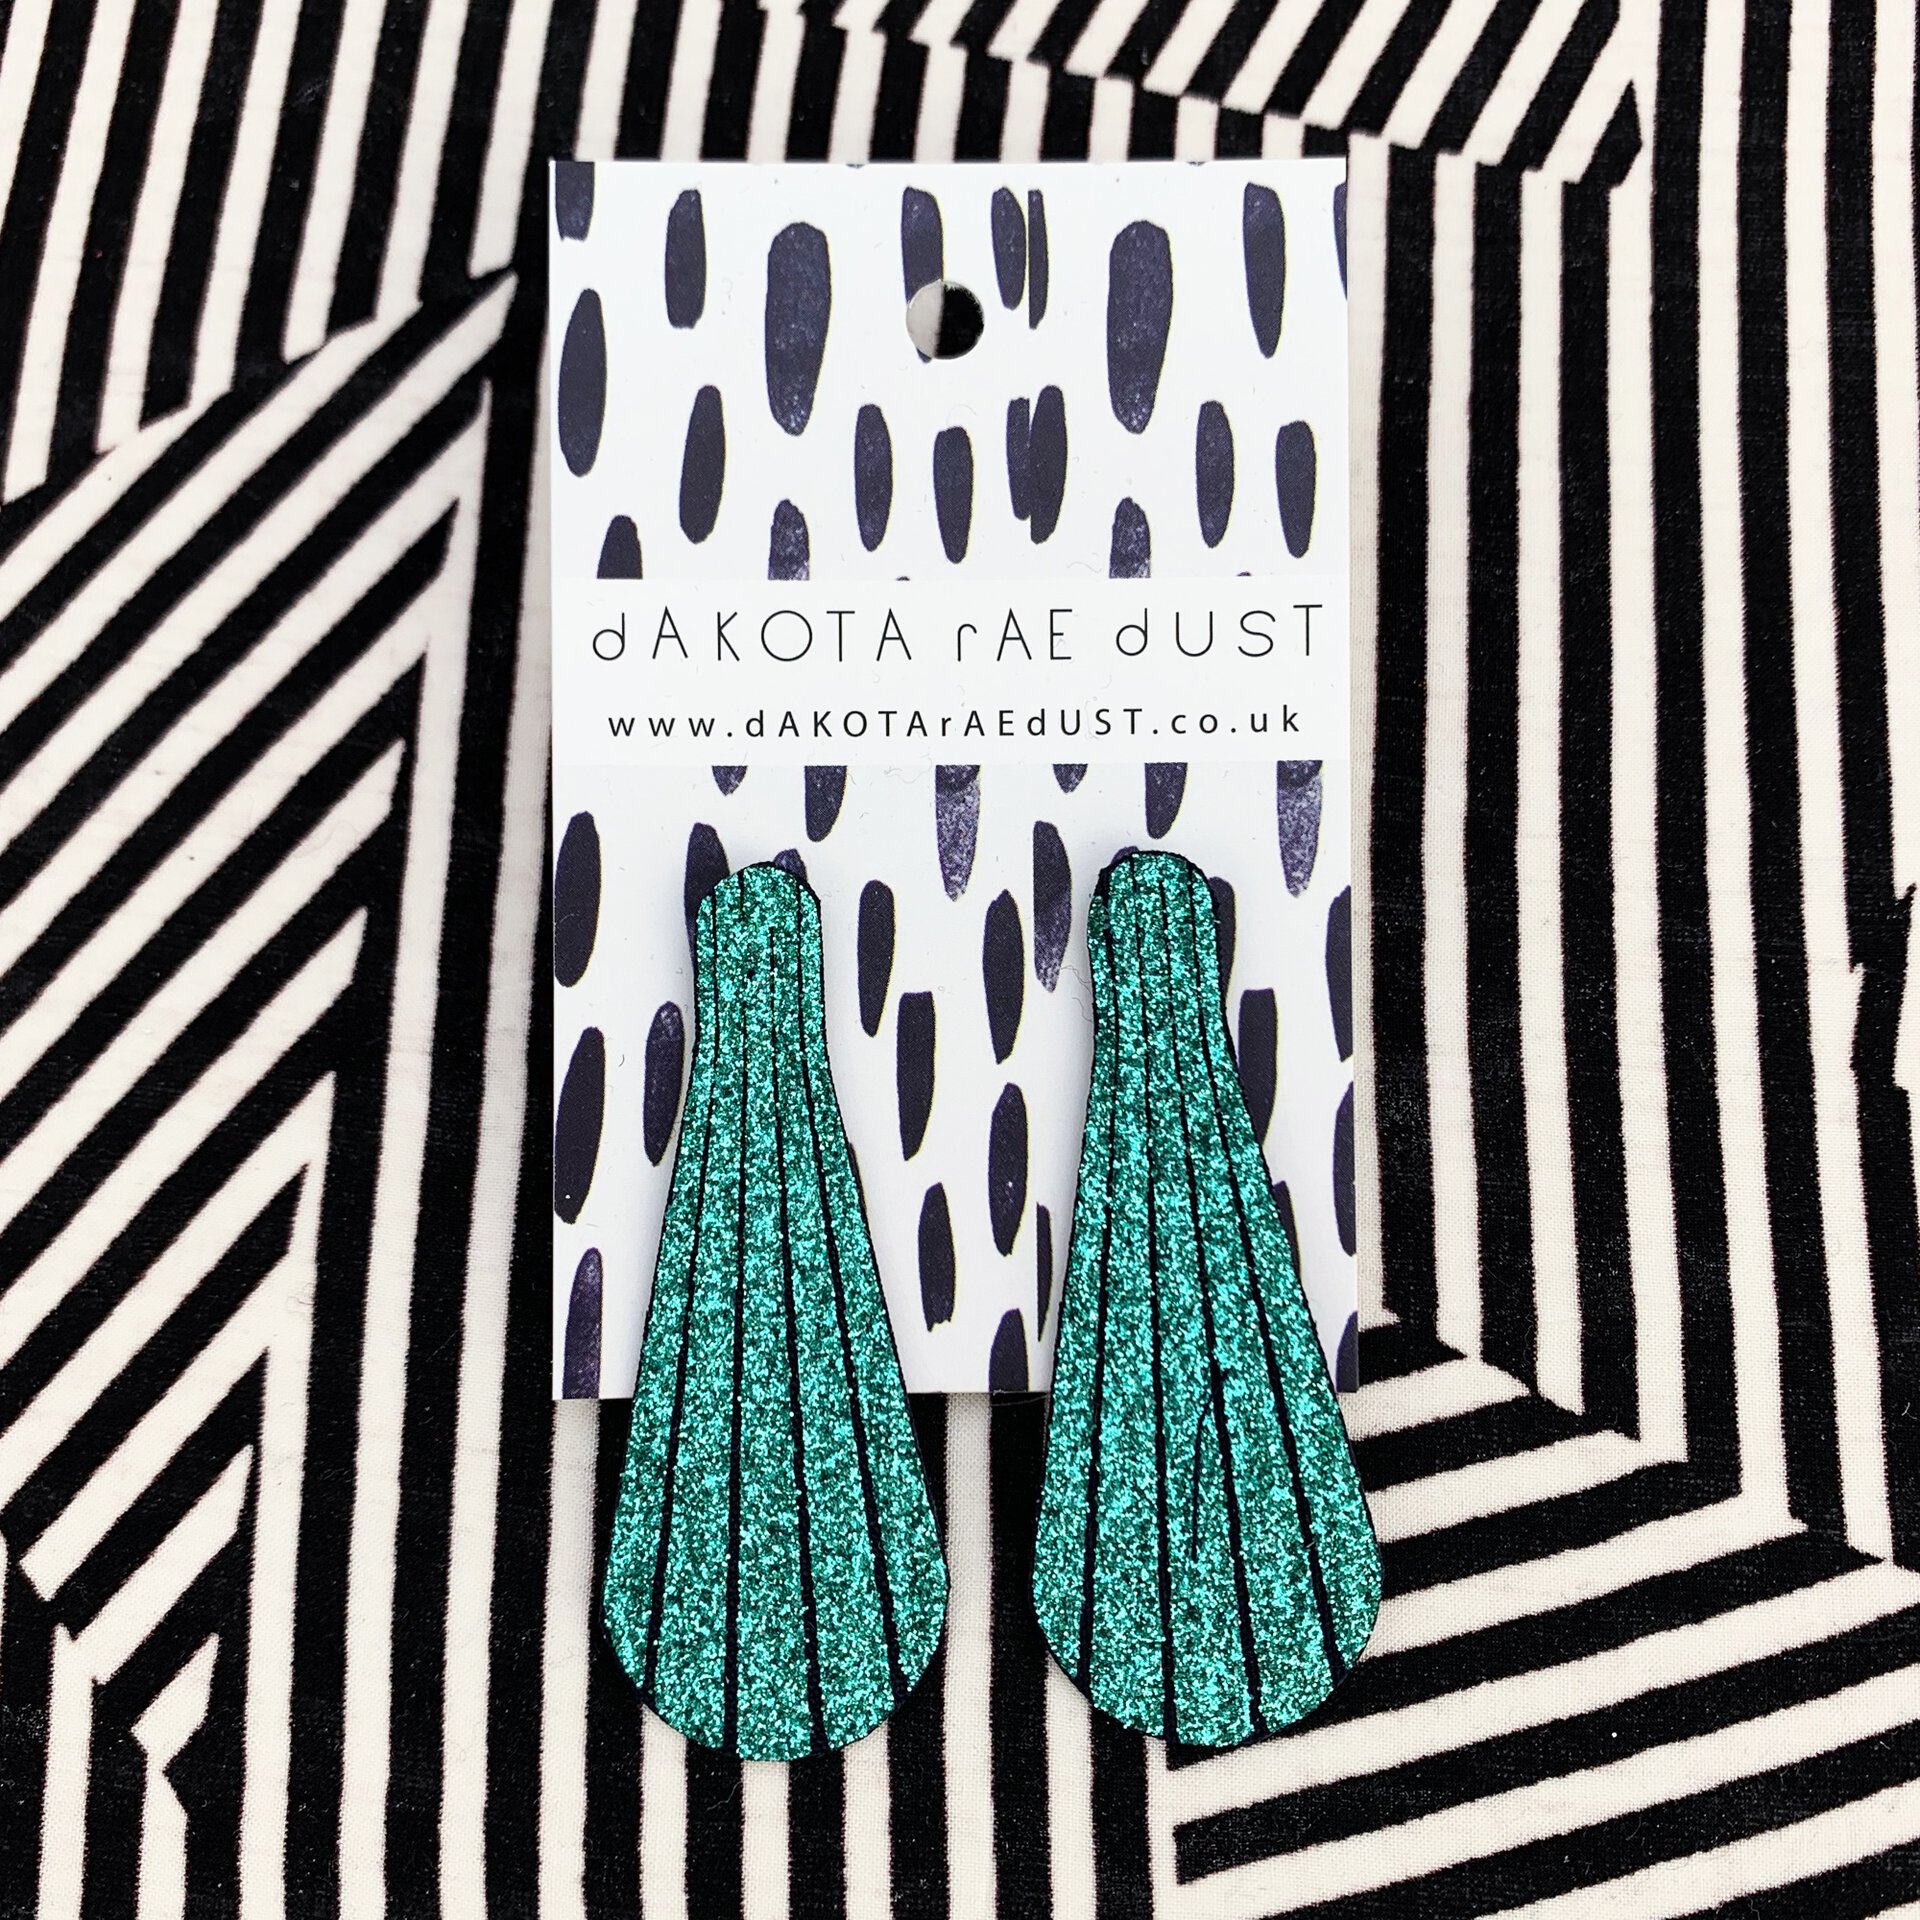 A pair of elongated emerald green glittery studs mounted on a black and white patterned, dakota rae dust branded card are sitting on a boldly graphic striped black and white background